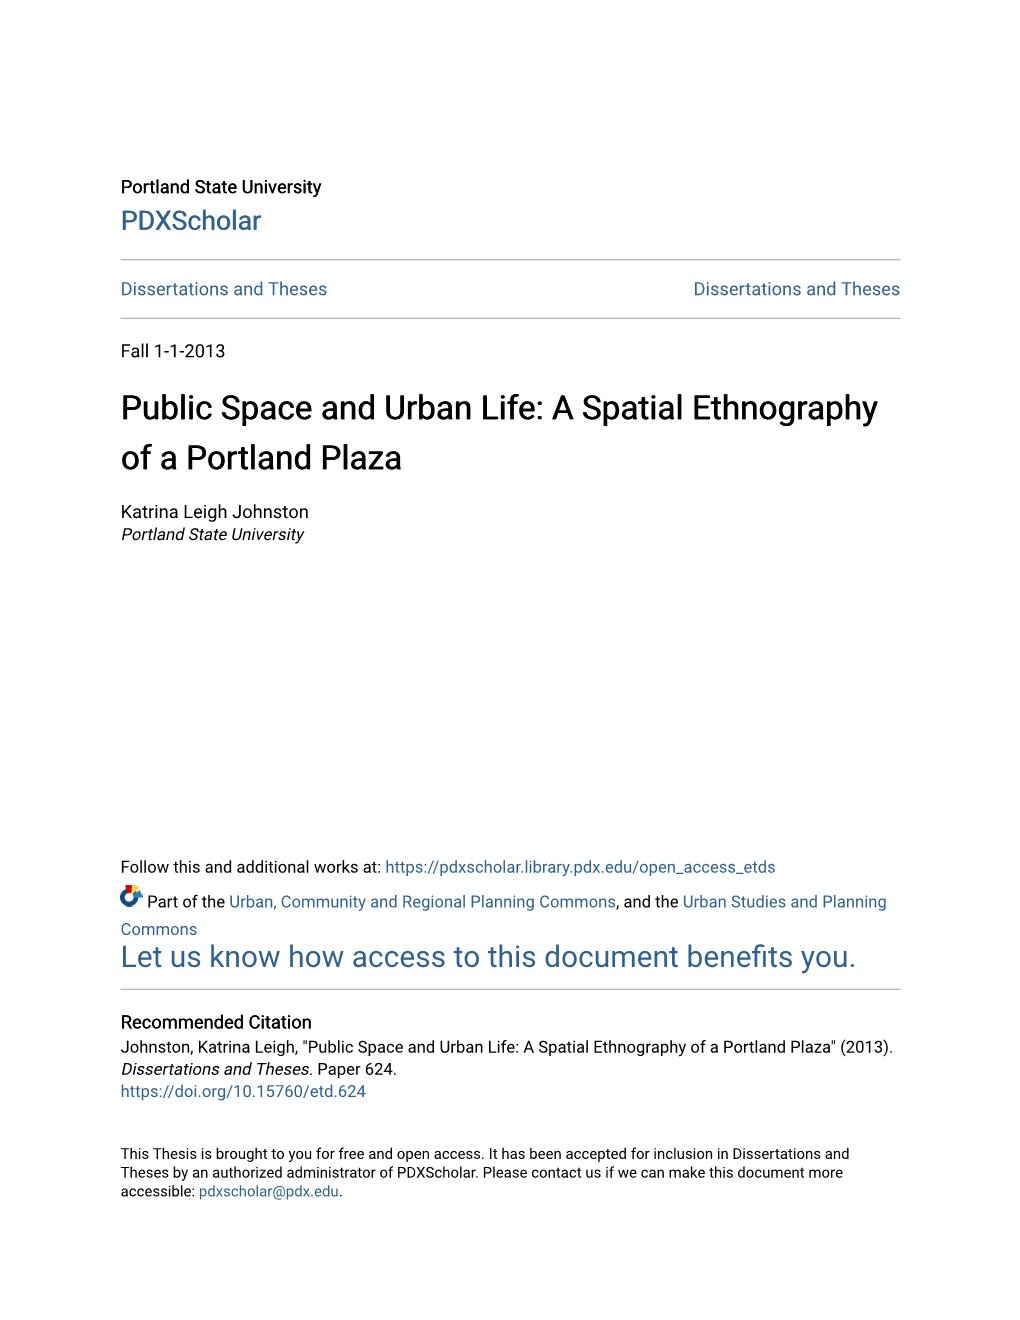 Public Space and Urban Life: a Spatial Ethnography of a Portland Plaza